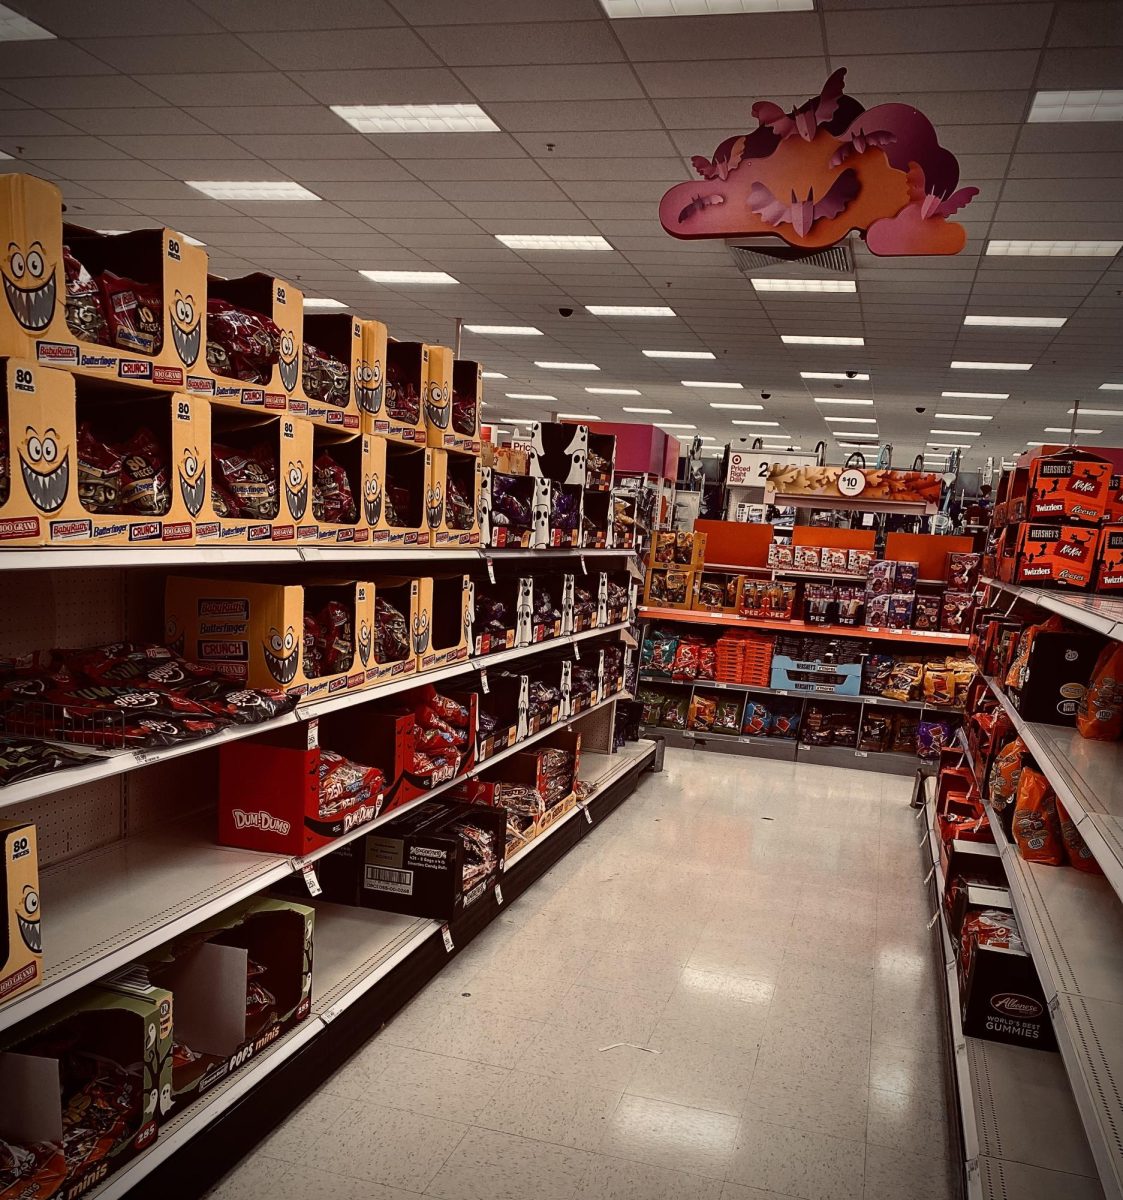 Store shelves are filled with candies every Halloween season.